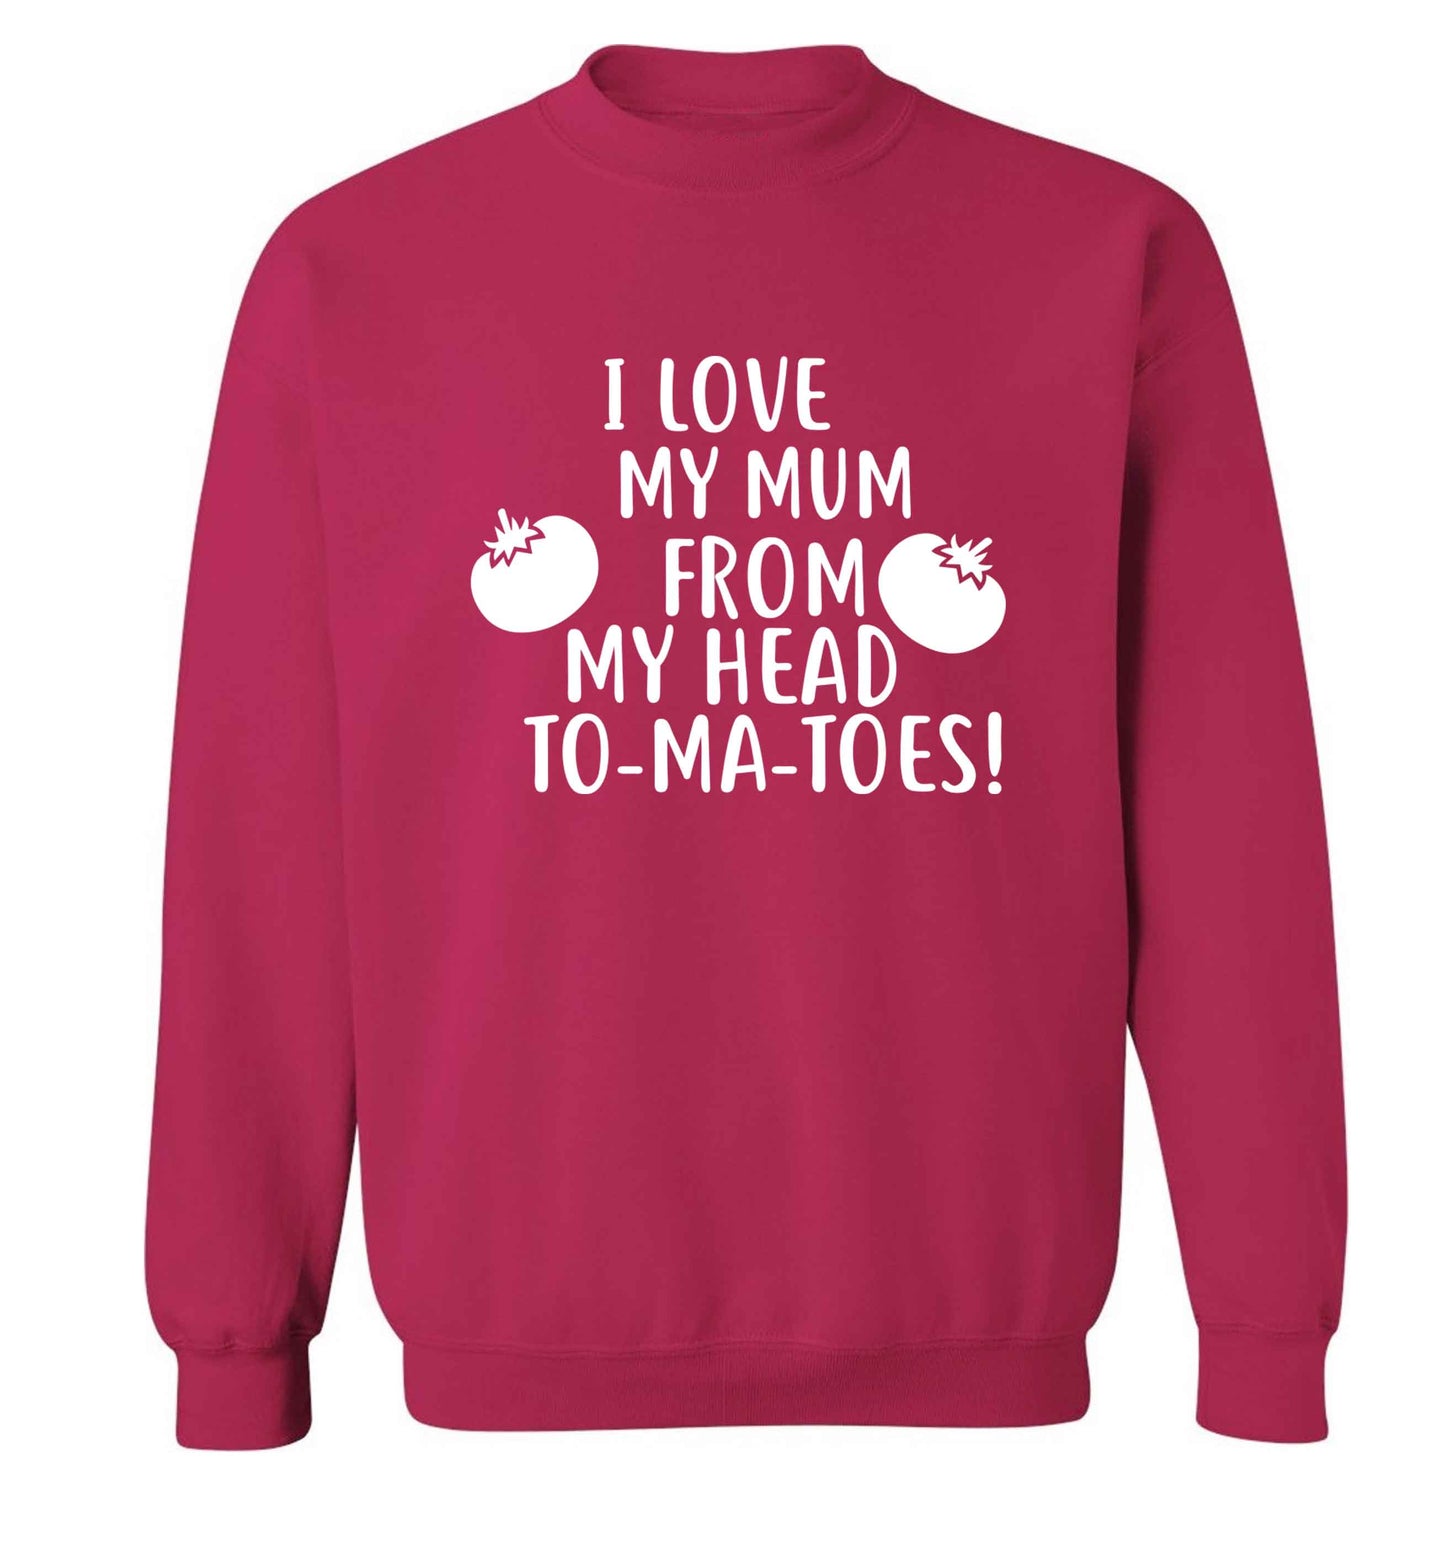 I love my mum from my head to-my-toes! adult's unisex pink sweater 2XL